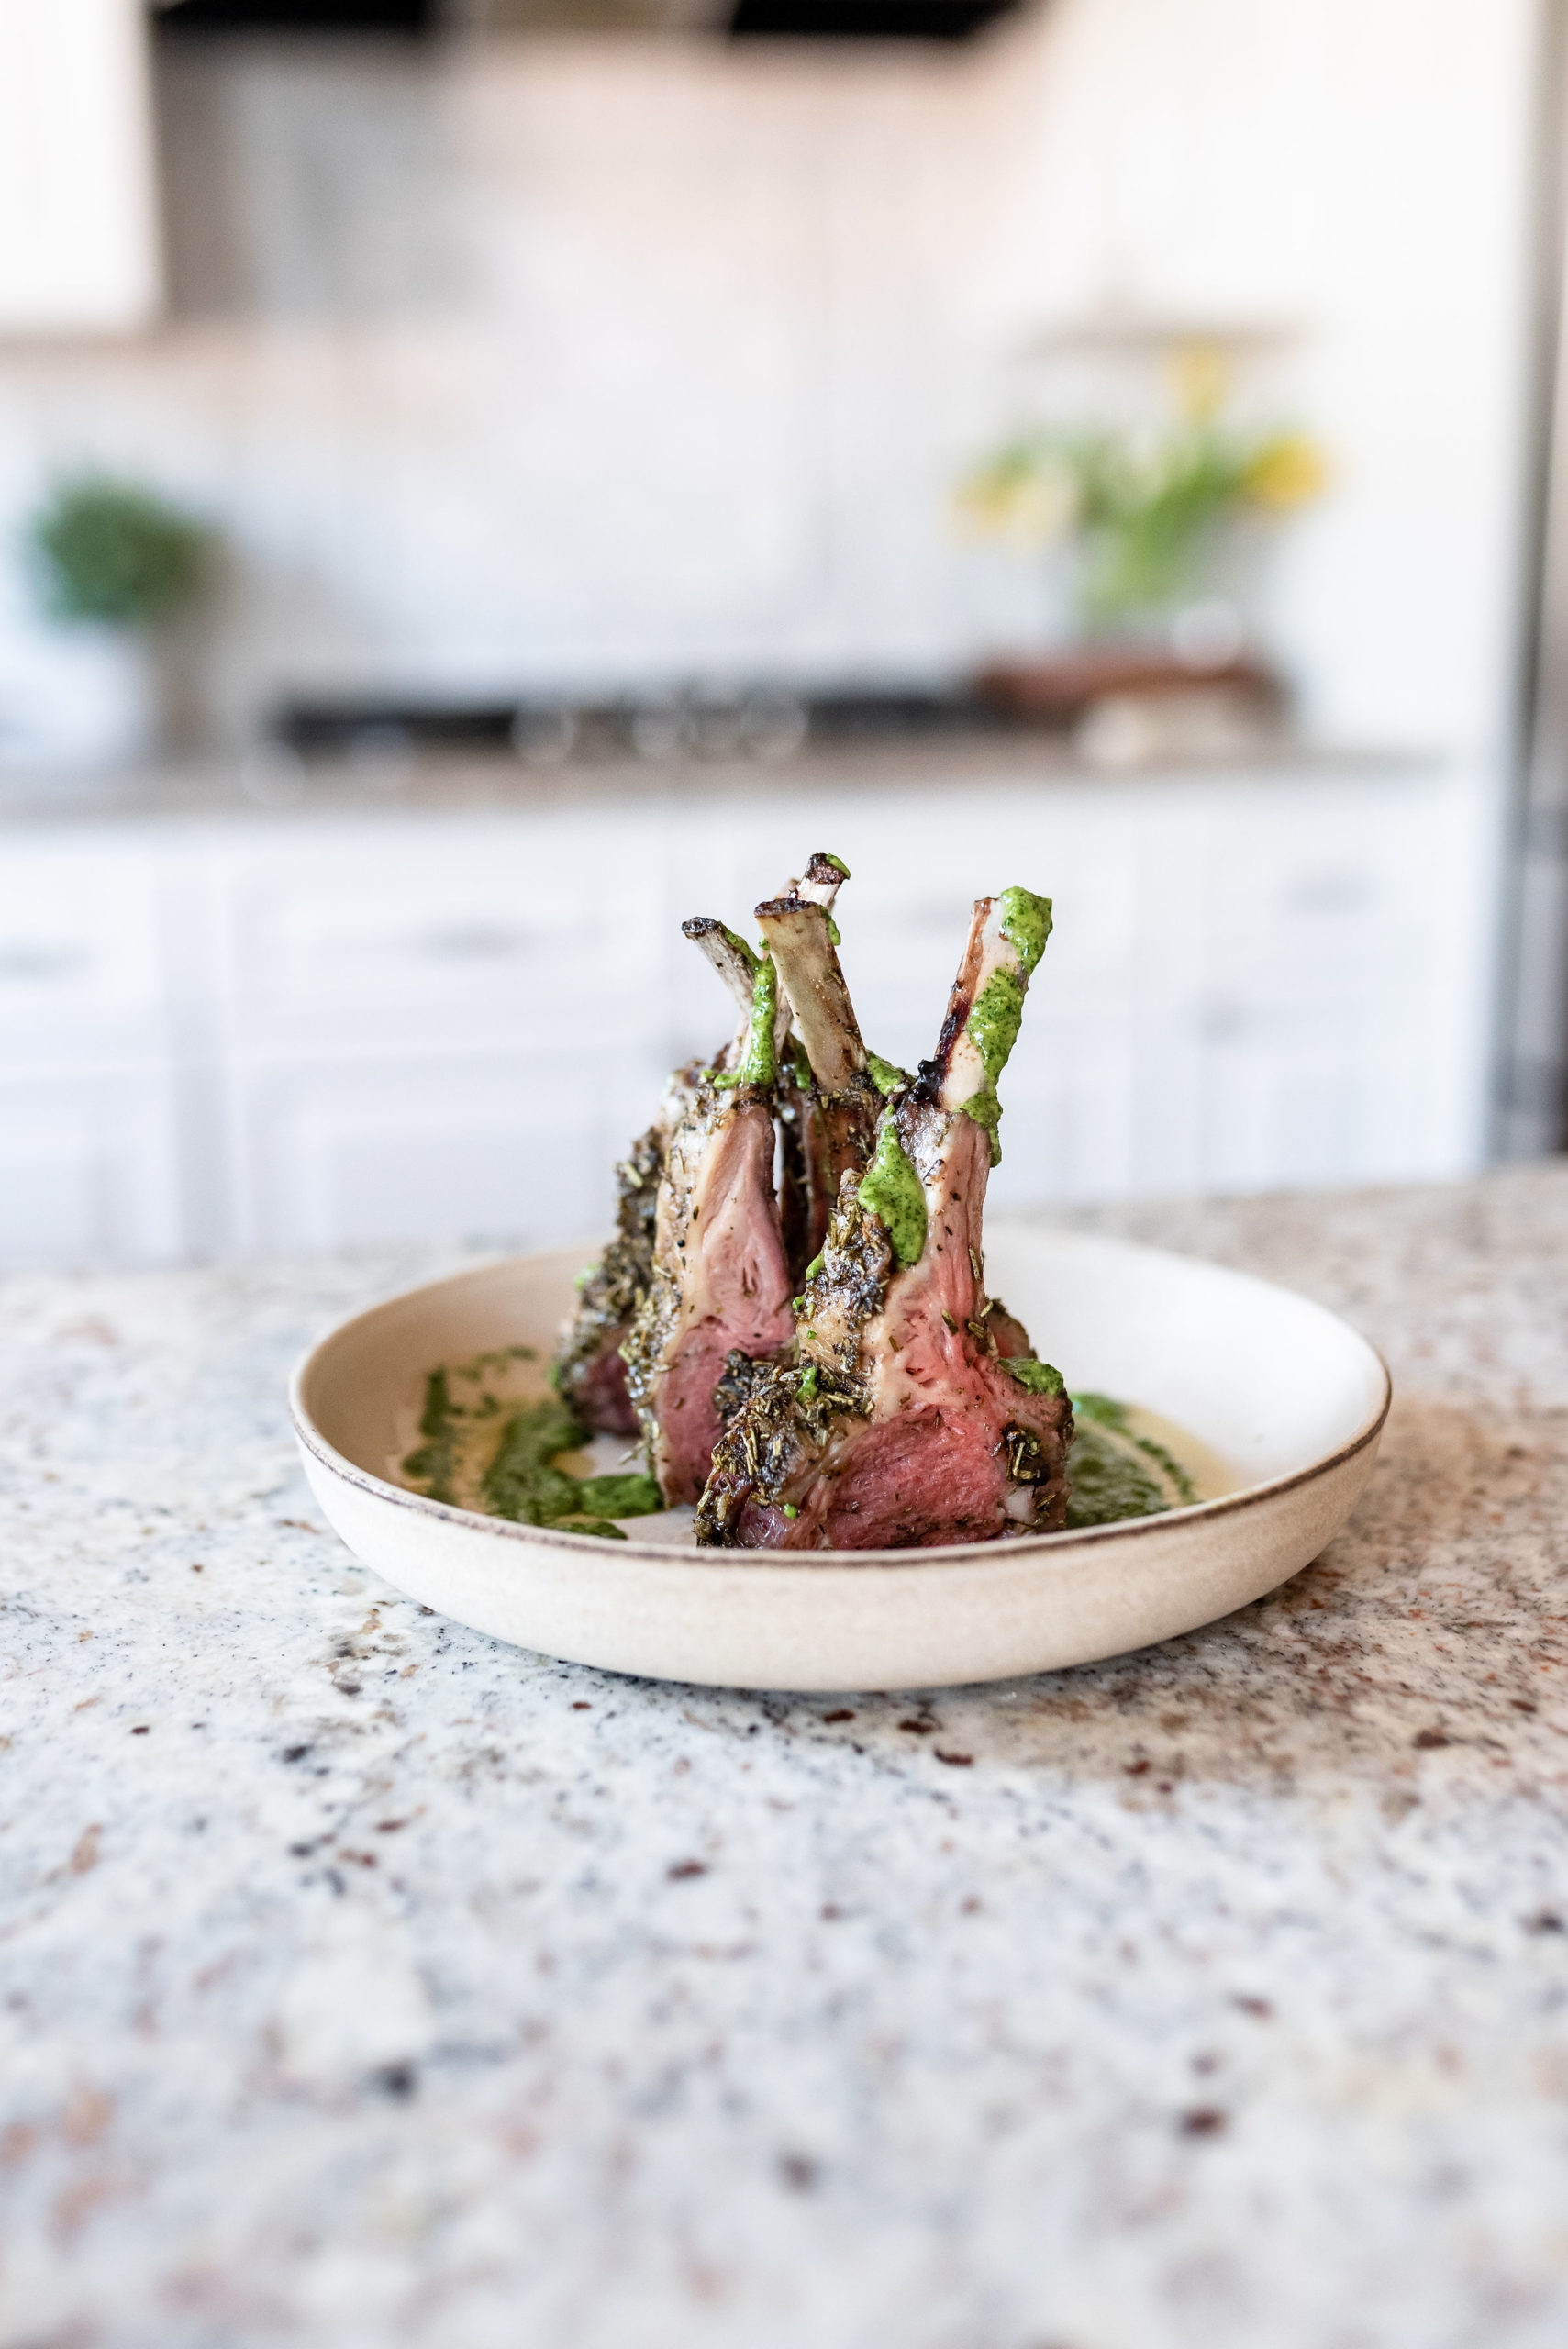 https://www.rosalynndaniels.com/wp-content/uploads/2021/03/How-to-cook-a-rack-of-lamb-in-the-oven-or-the-grill-scaled.jpg